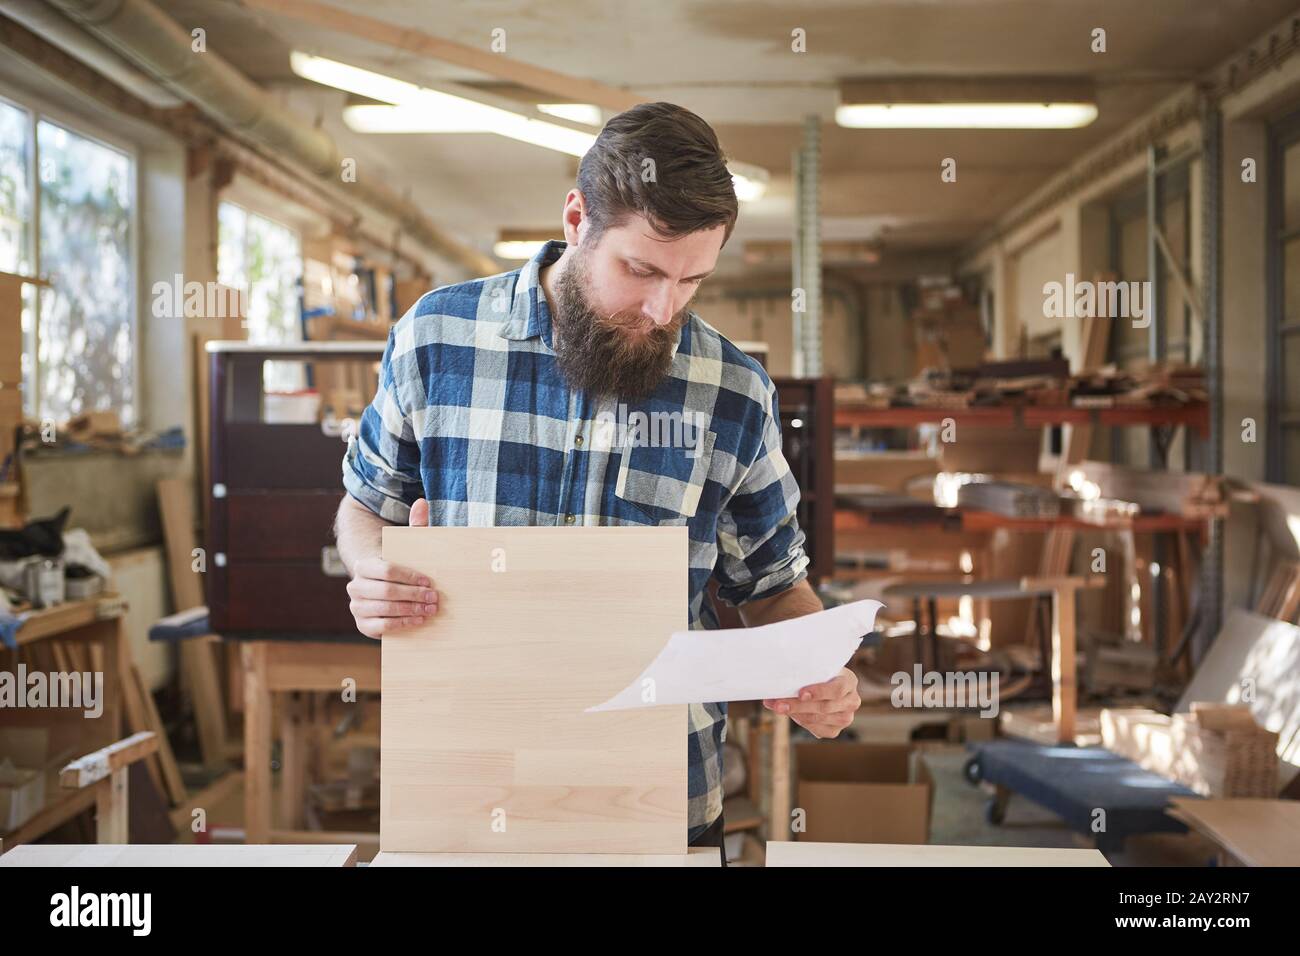 Carpenter with order on a sheet of paper in furniture making Stock Photo